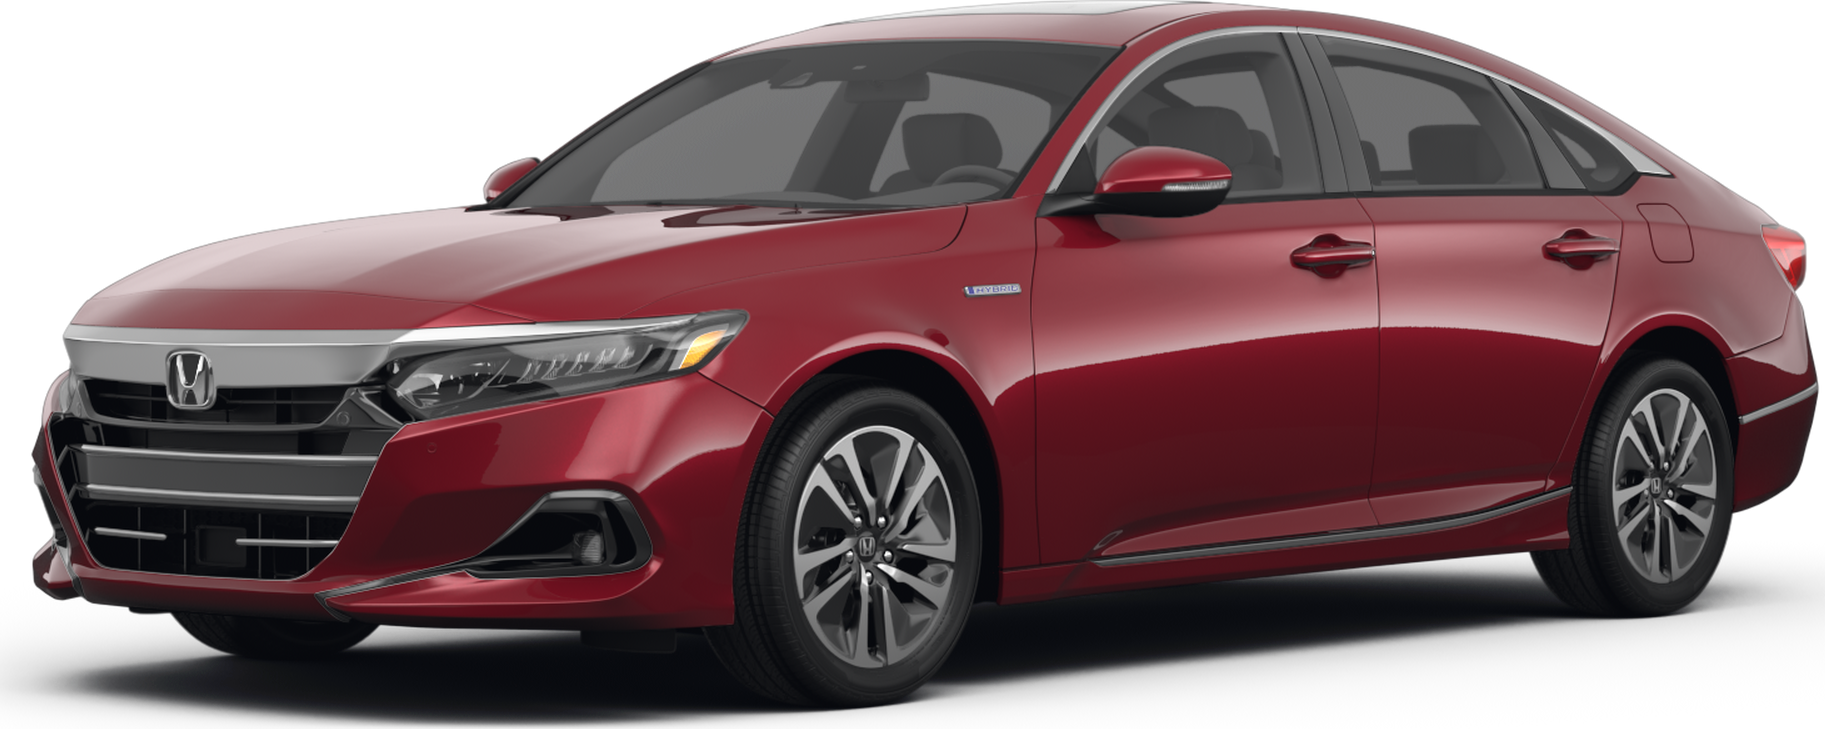 2022 Honda Accord Hybrid Price Reviews Pictures And More Kelley Blue Book